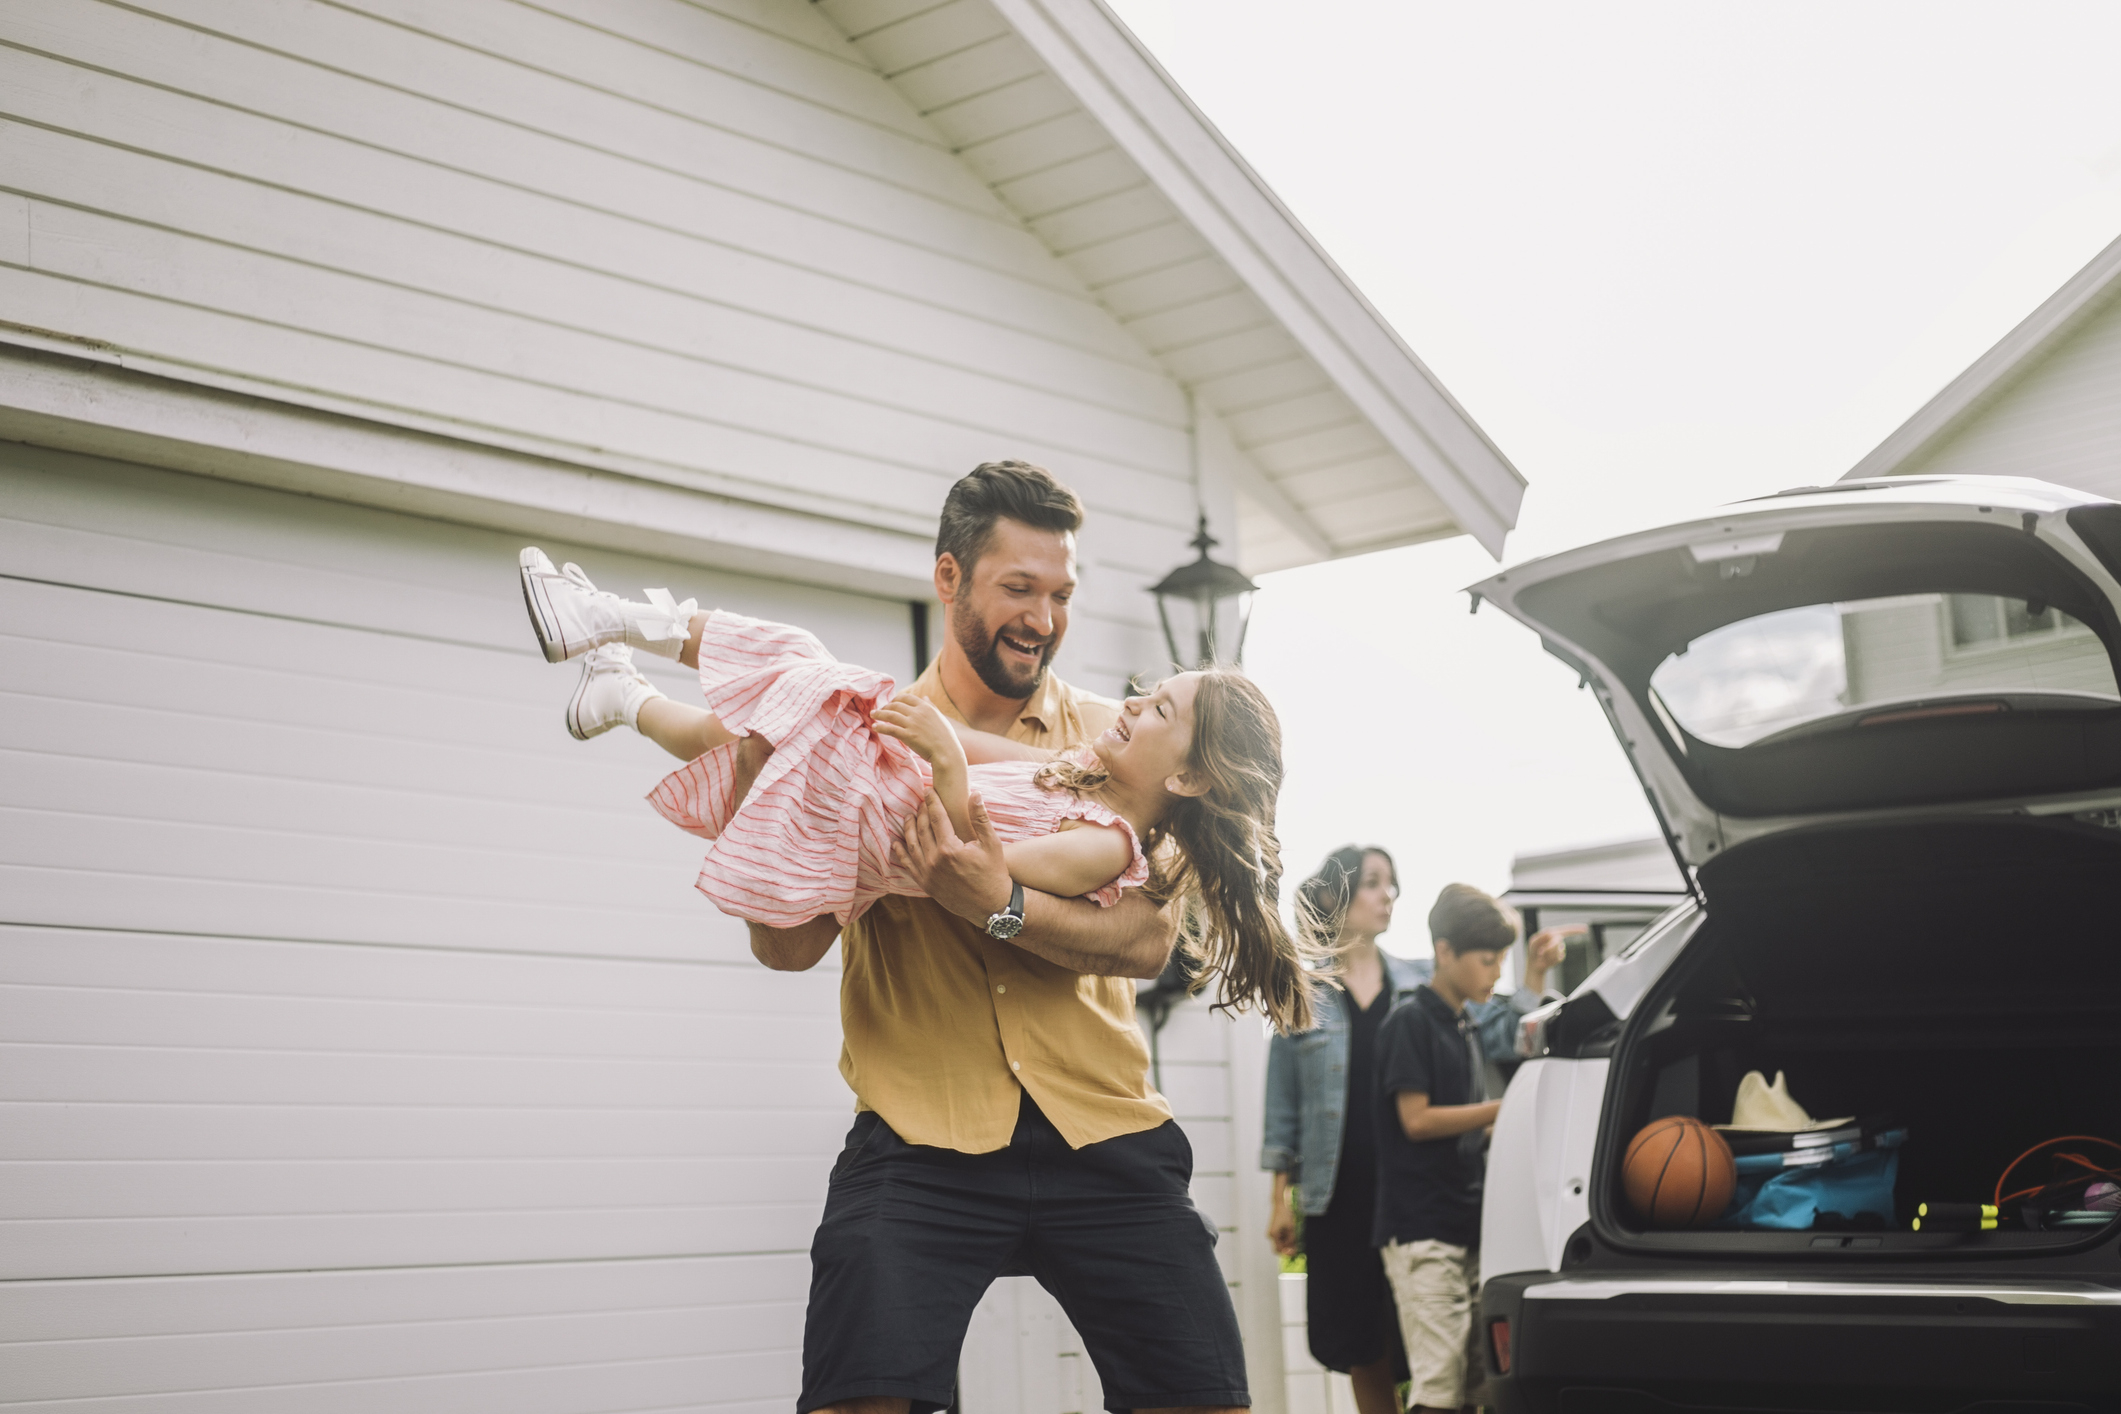 Man lifting a happy child beside an open car trunk at a house, with others nearby